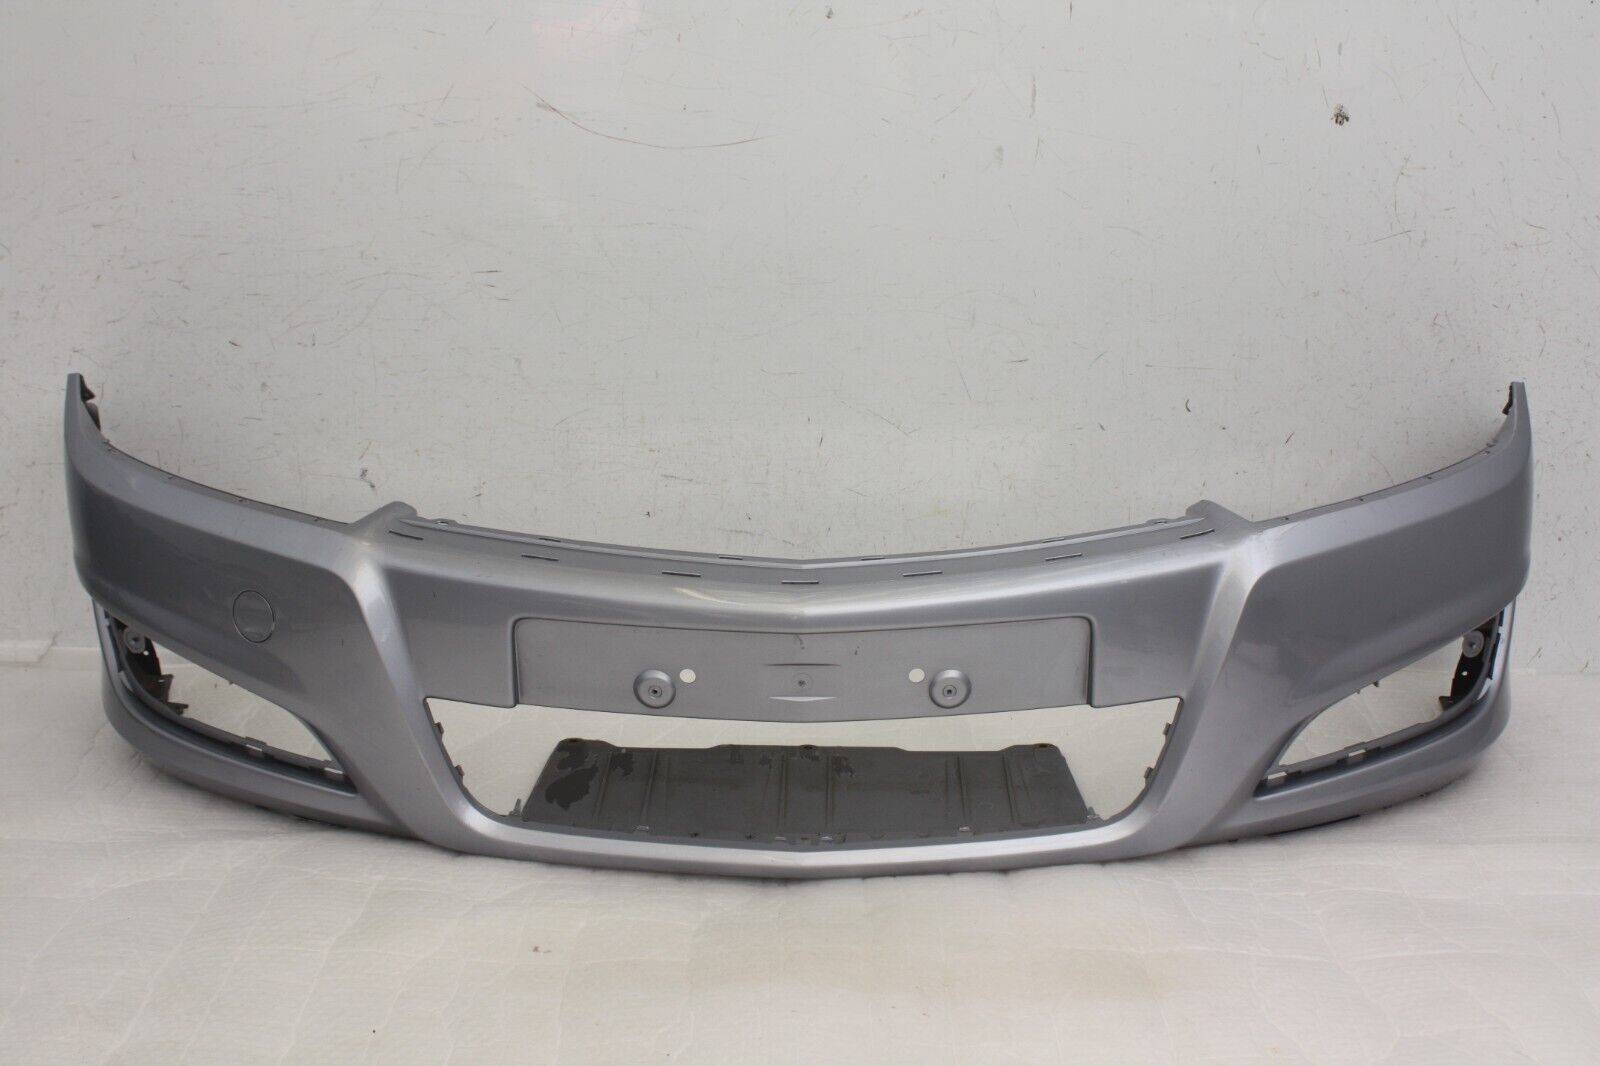 Vauxhall Astra H Front Bumper 2007 TO 2009 13225746 Genuine DAMAGED 176333456194